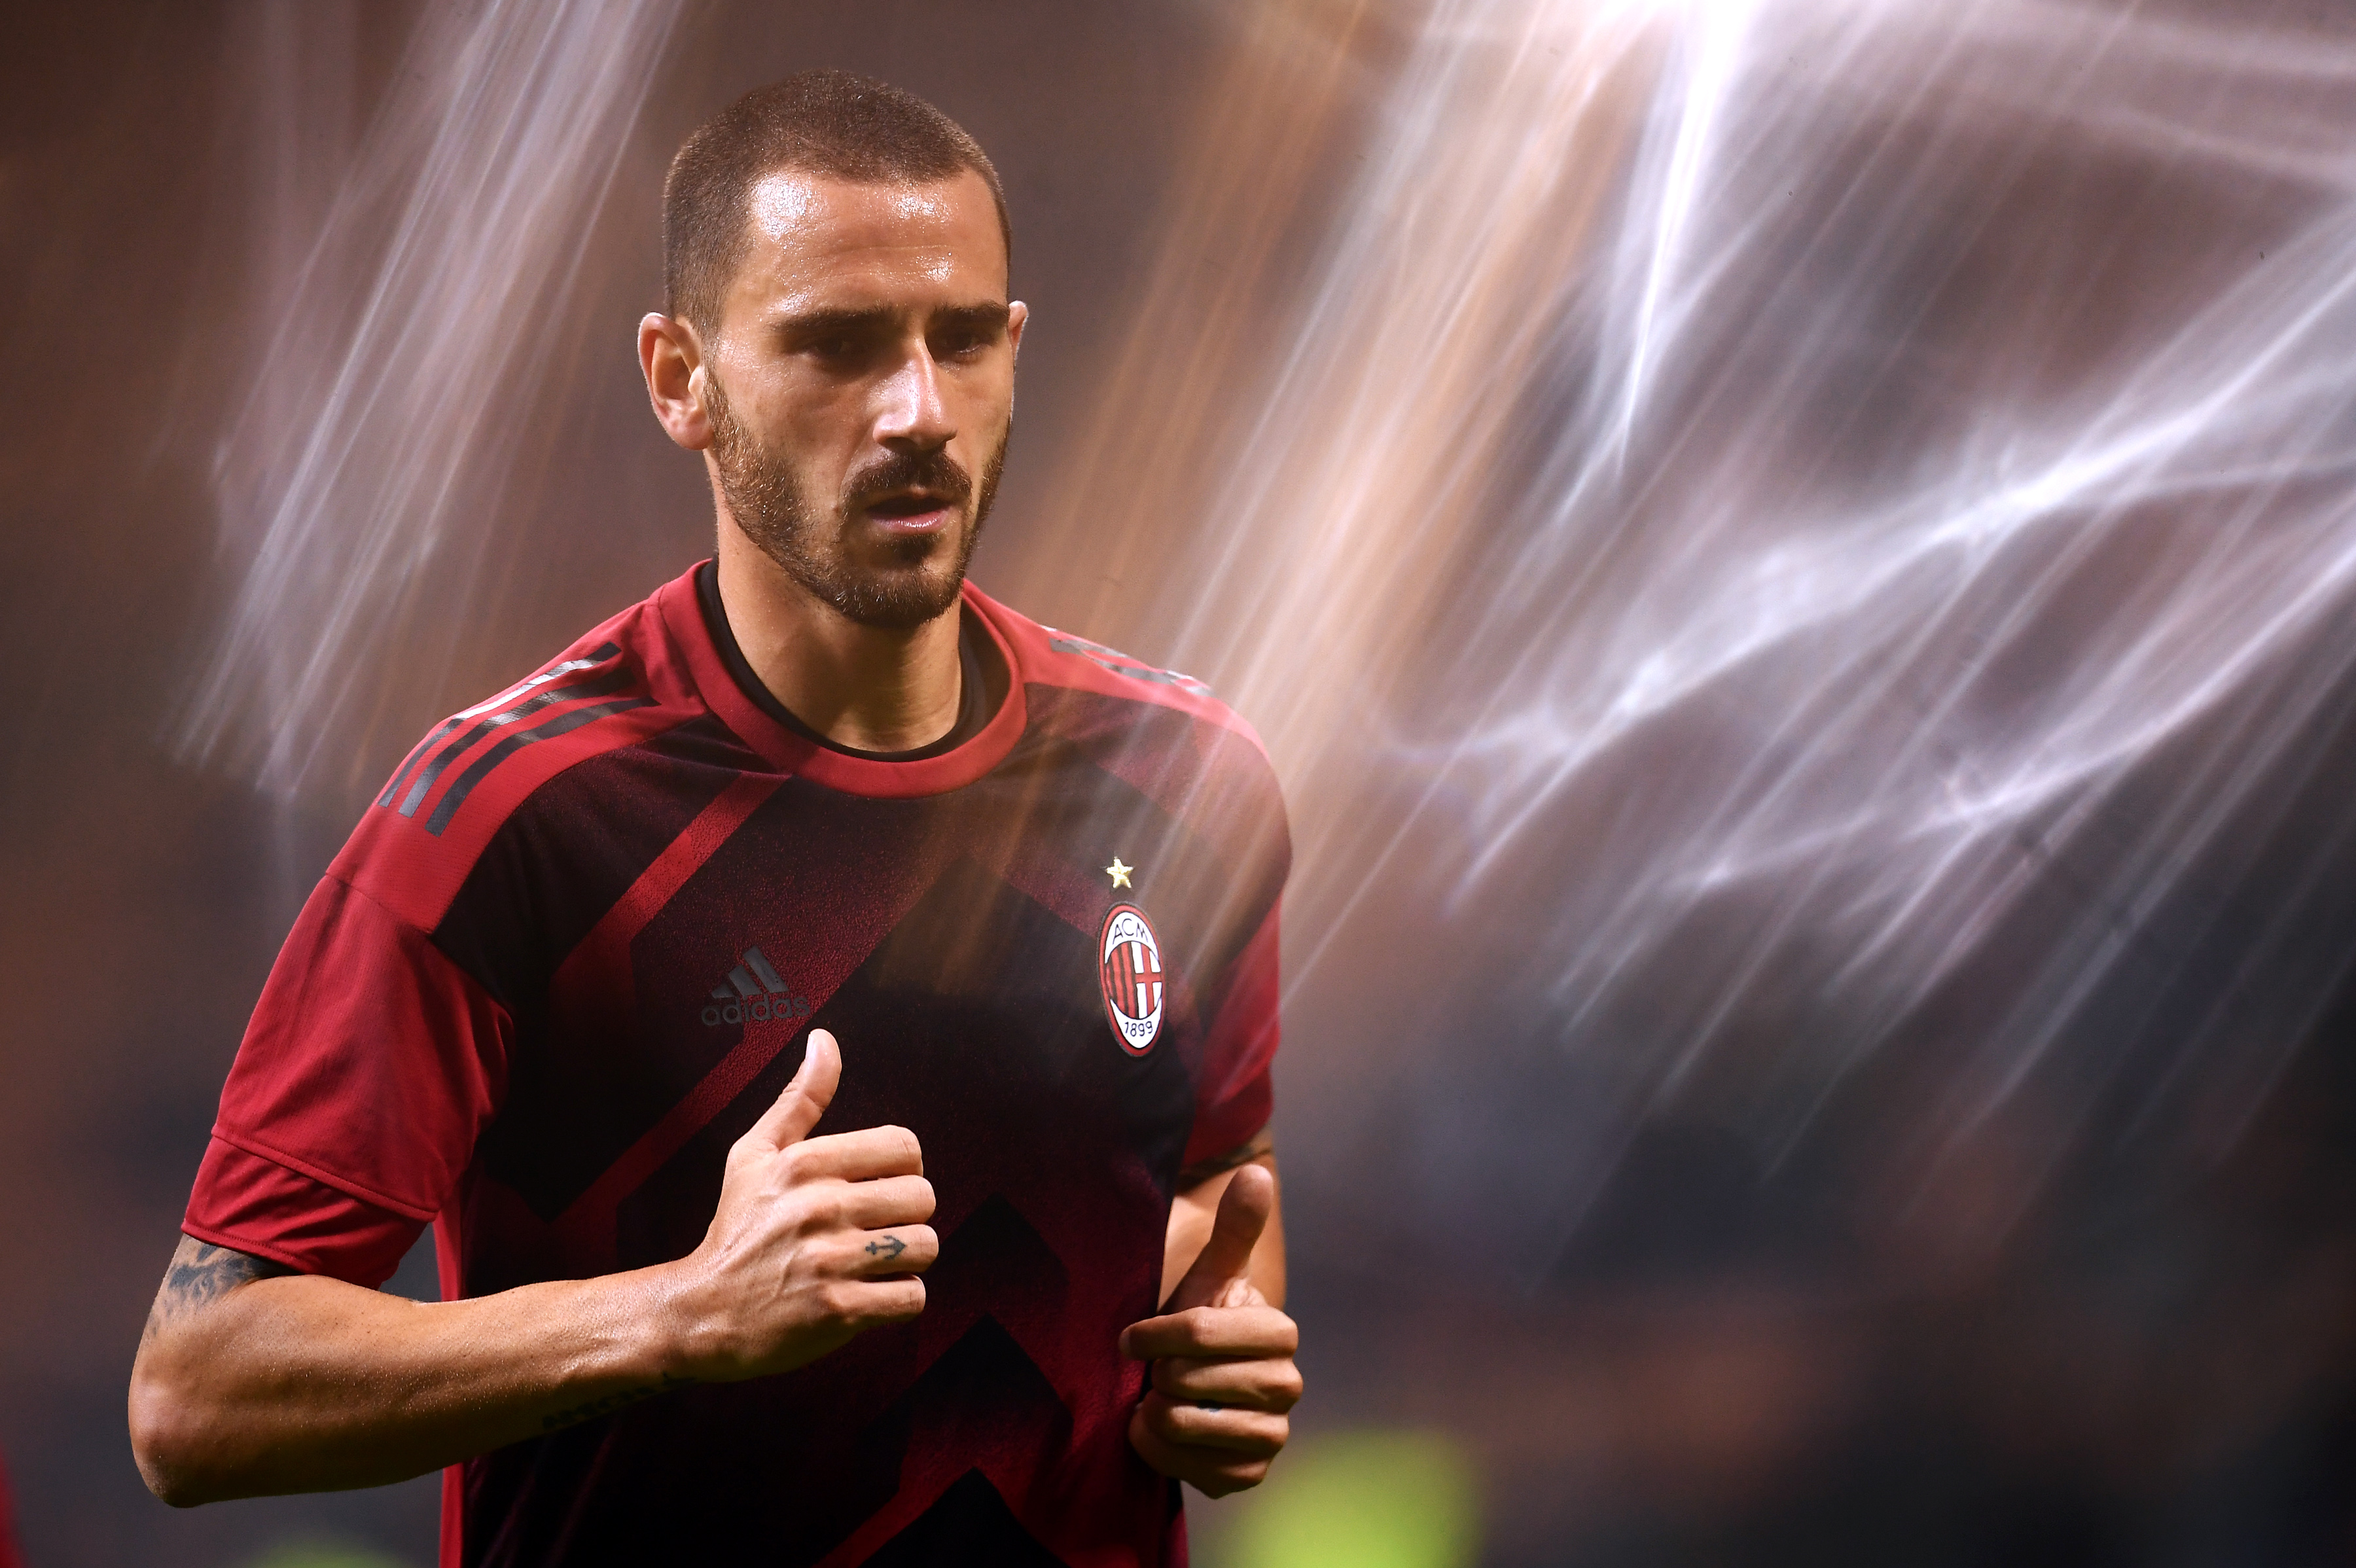 AC Milan's defender Leonardo Bonucci from Italy warms up before the UEFA Europa League football match AC Milan vs AEK Athens at the "San Siro Stadium" in Milan on October 19, 2017.  / AFP PHOTO / MARCO BERTORELLO        (Photo credit should read MARCO BERTORELLO/AFP/Getty Images)